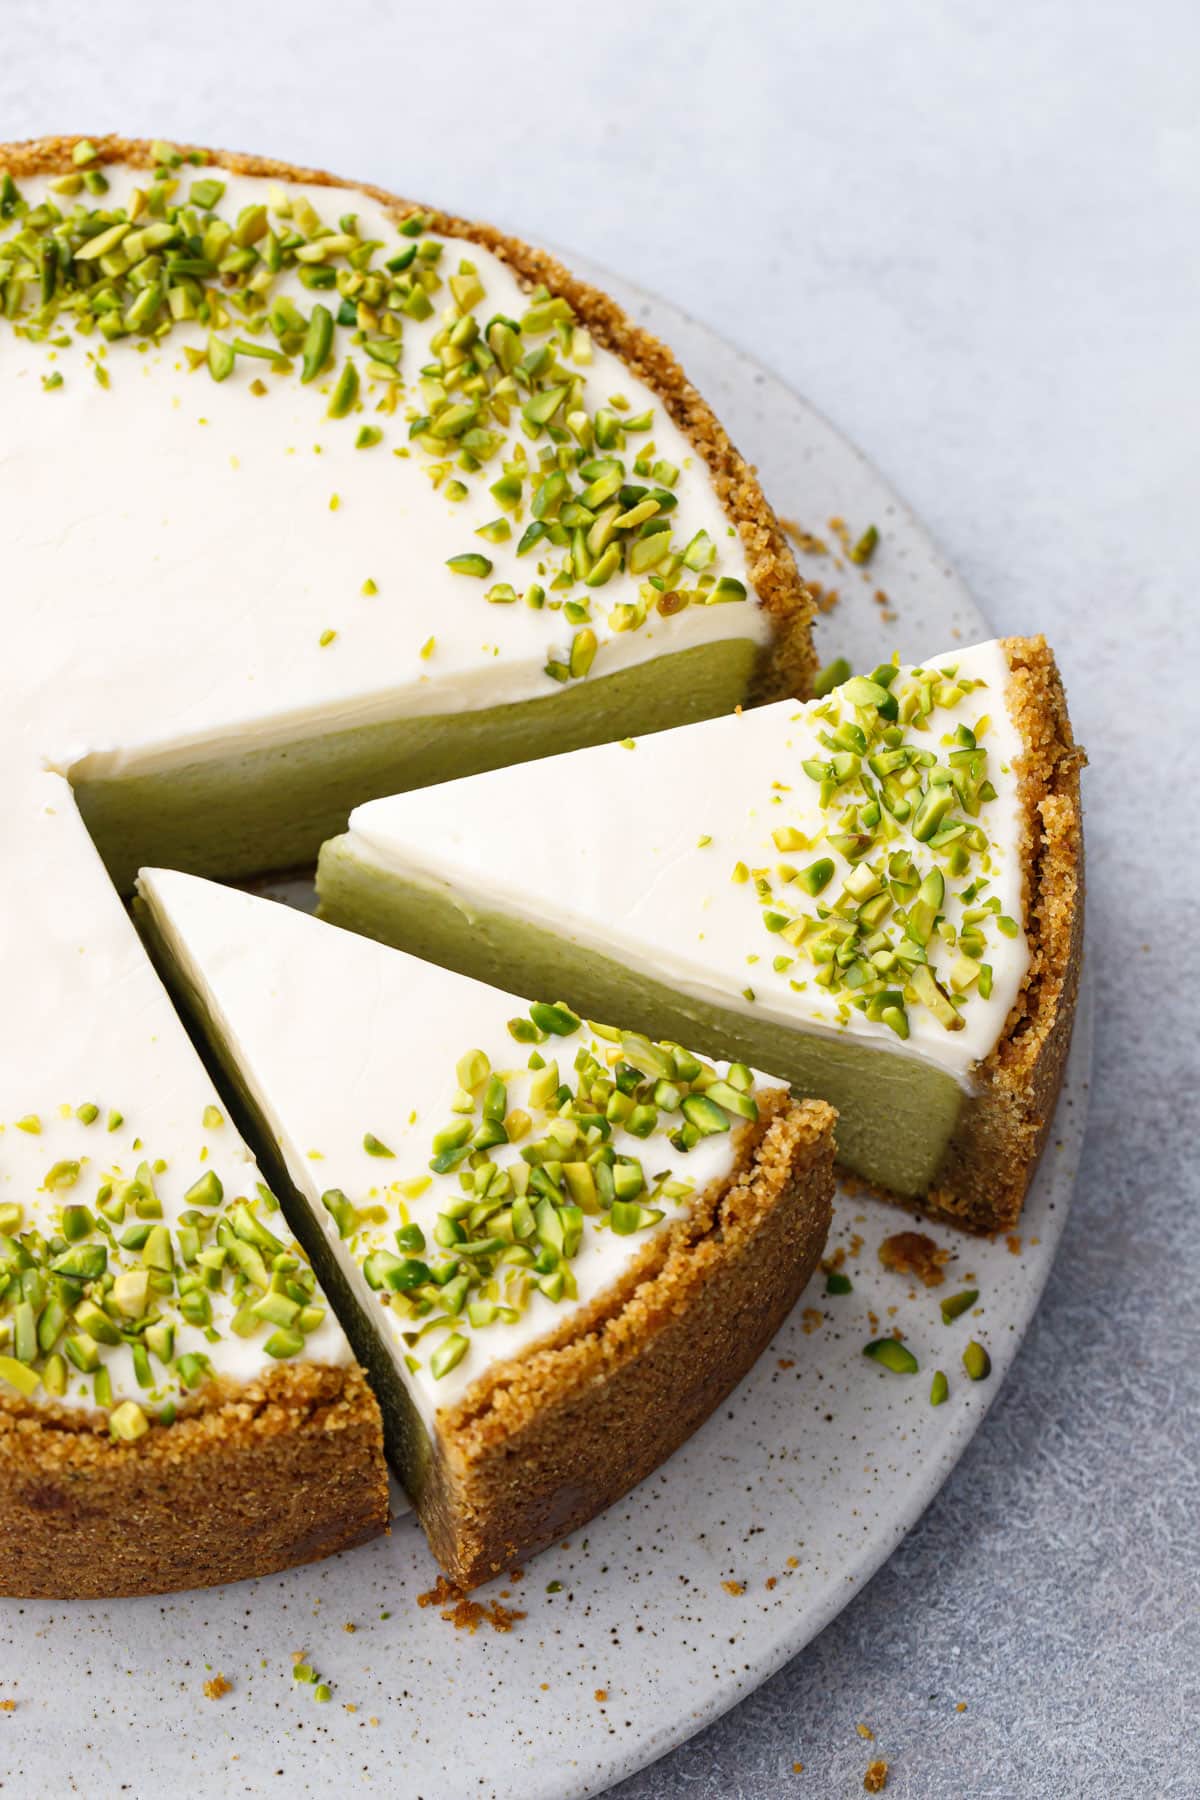 Two slices out of a full round Pistachio Sour Cream Cheesecake, with a white sour cream topping and a border of chopped green pistachios.